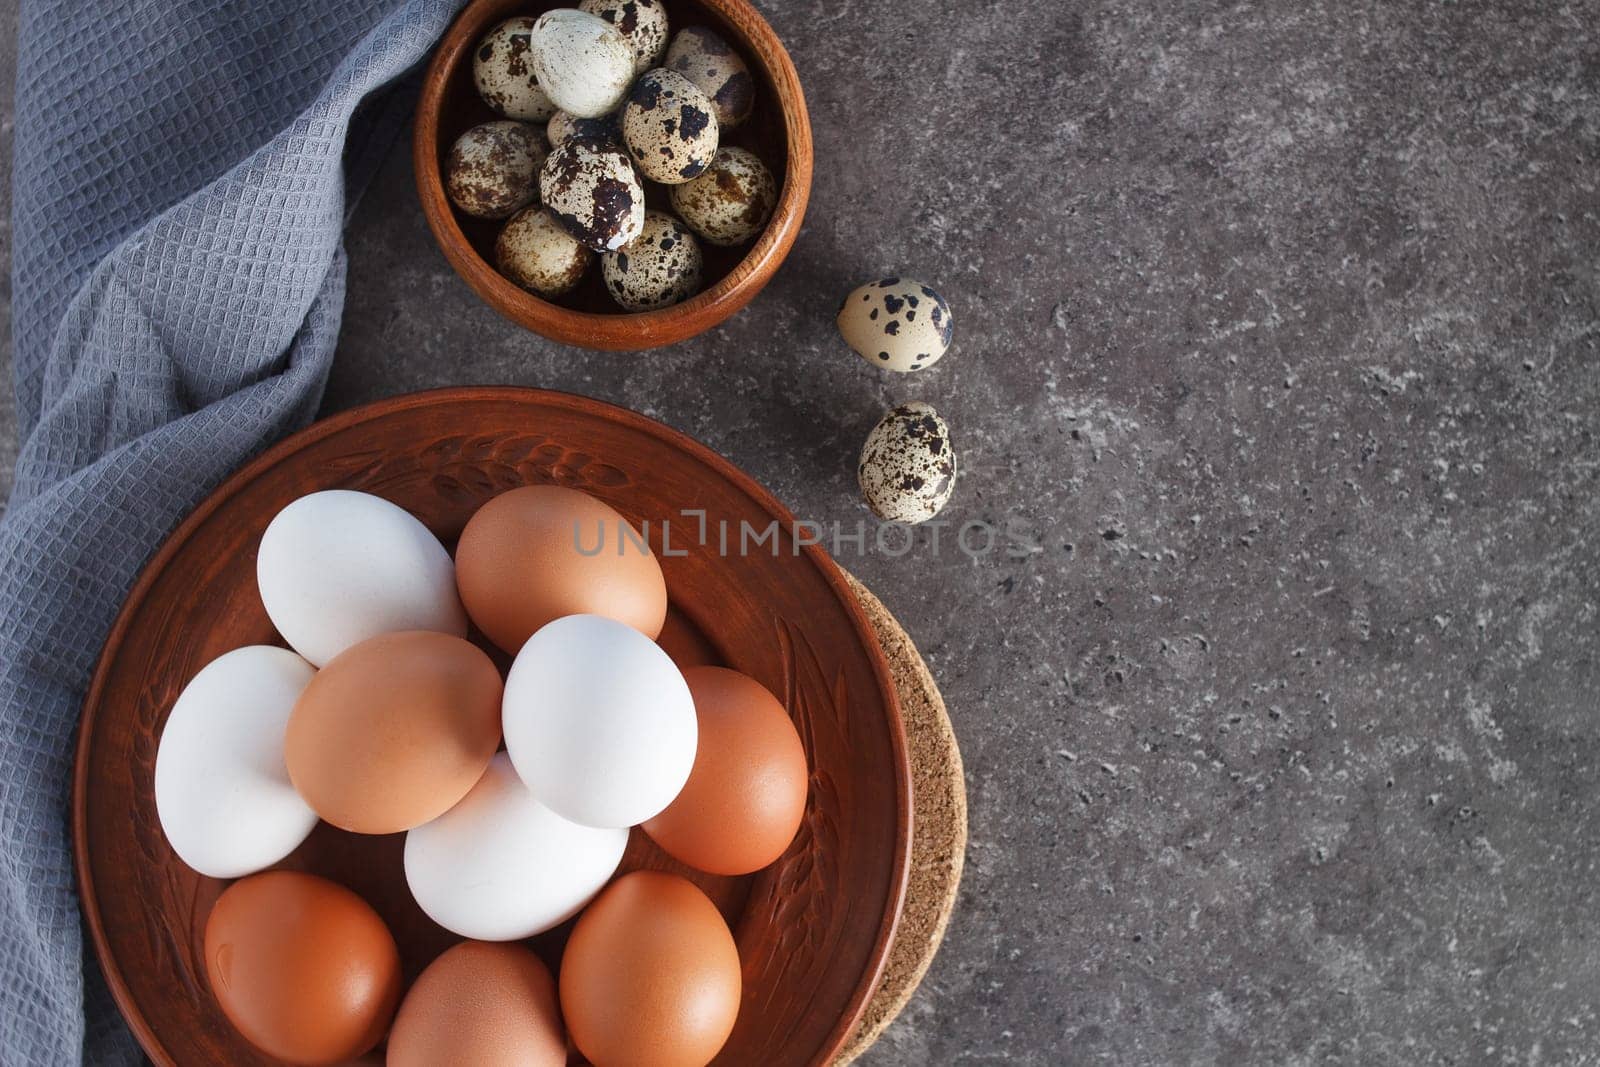 Chicken and quail eggs on a plate on a concrete background with textiles. copy space